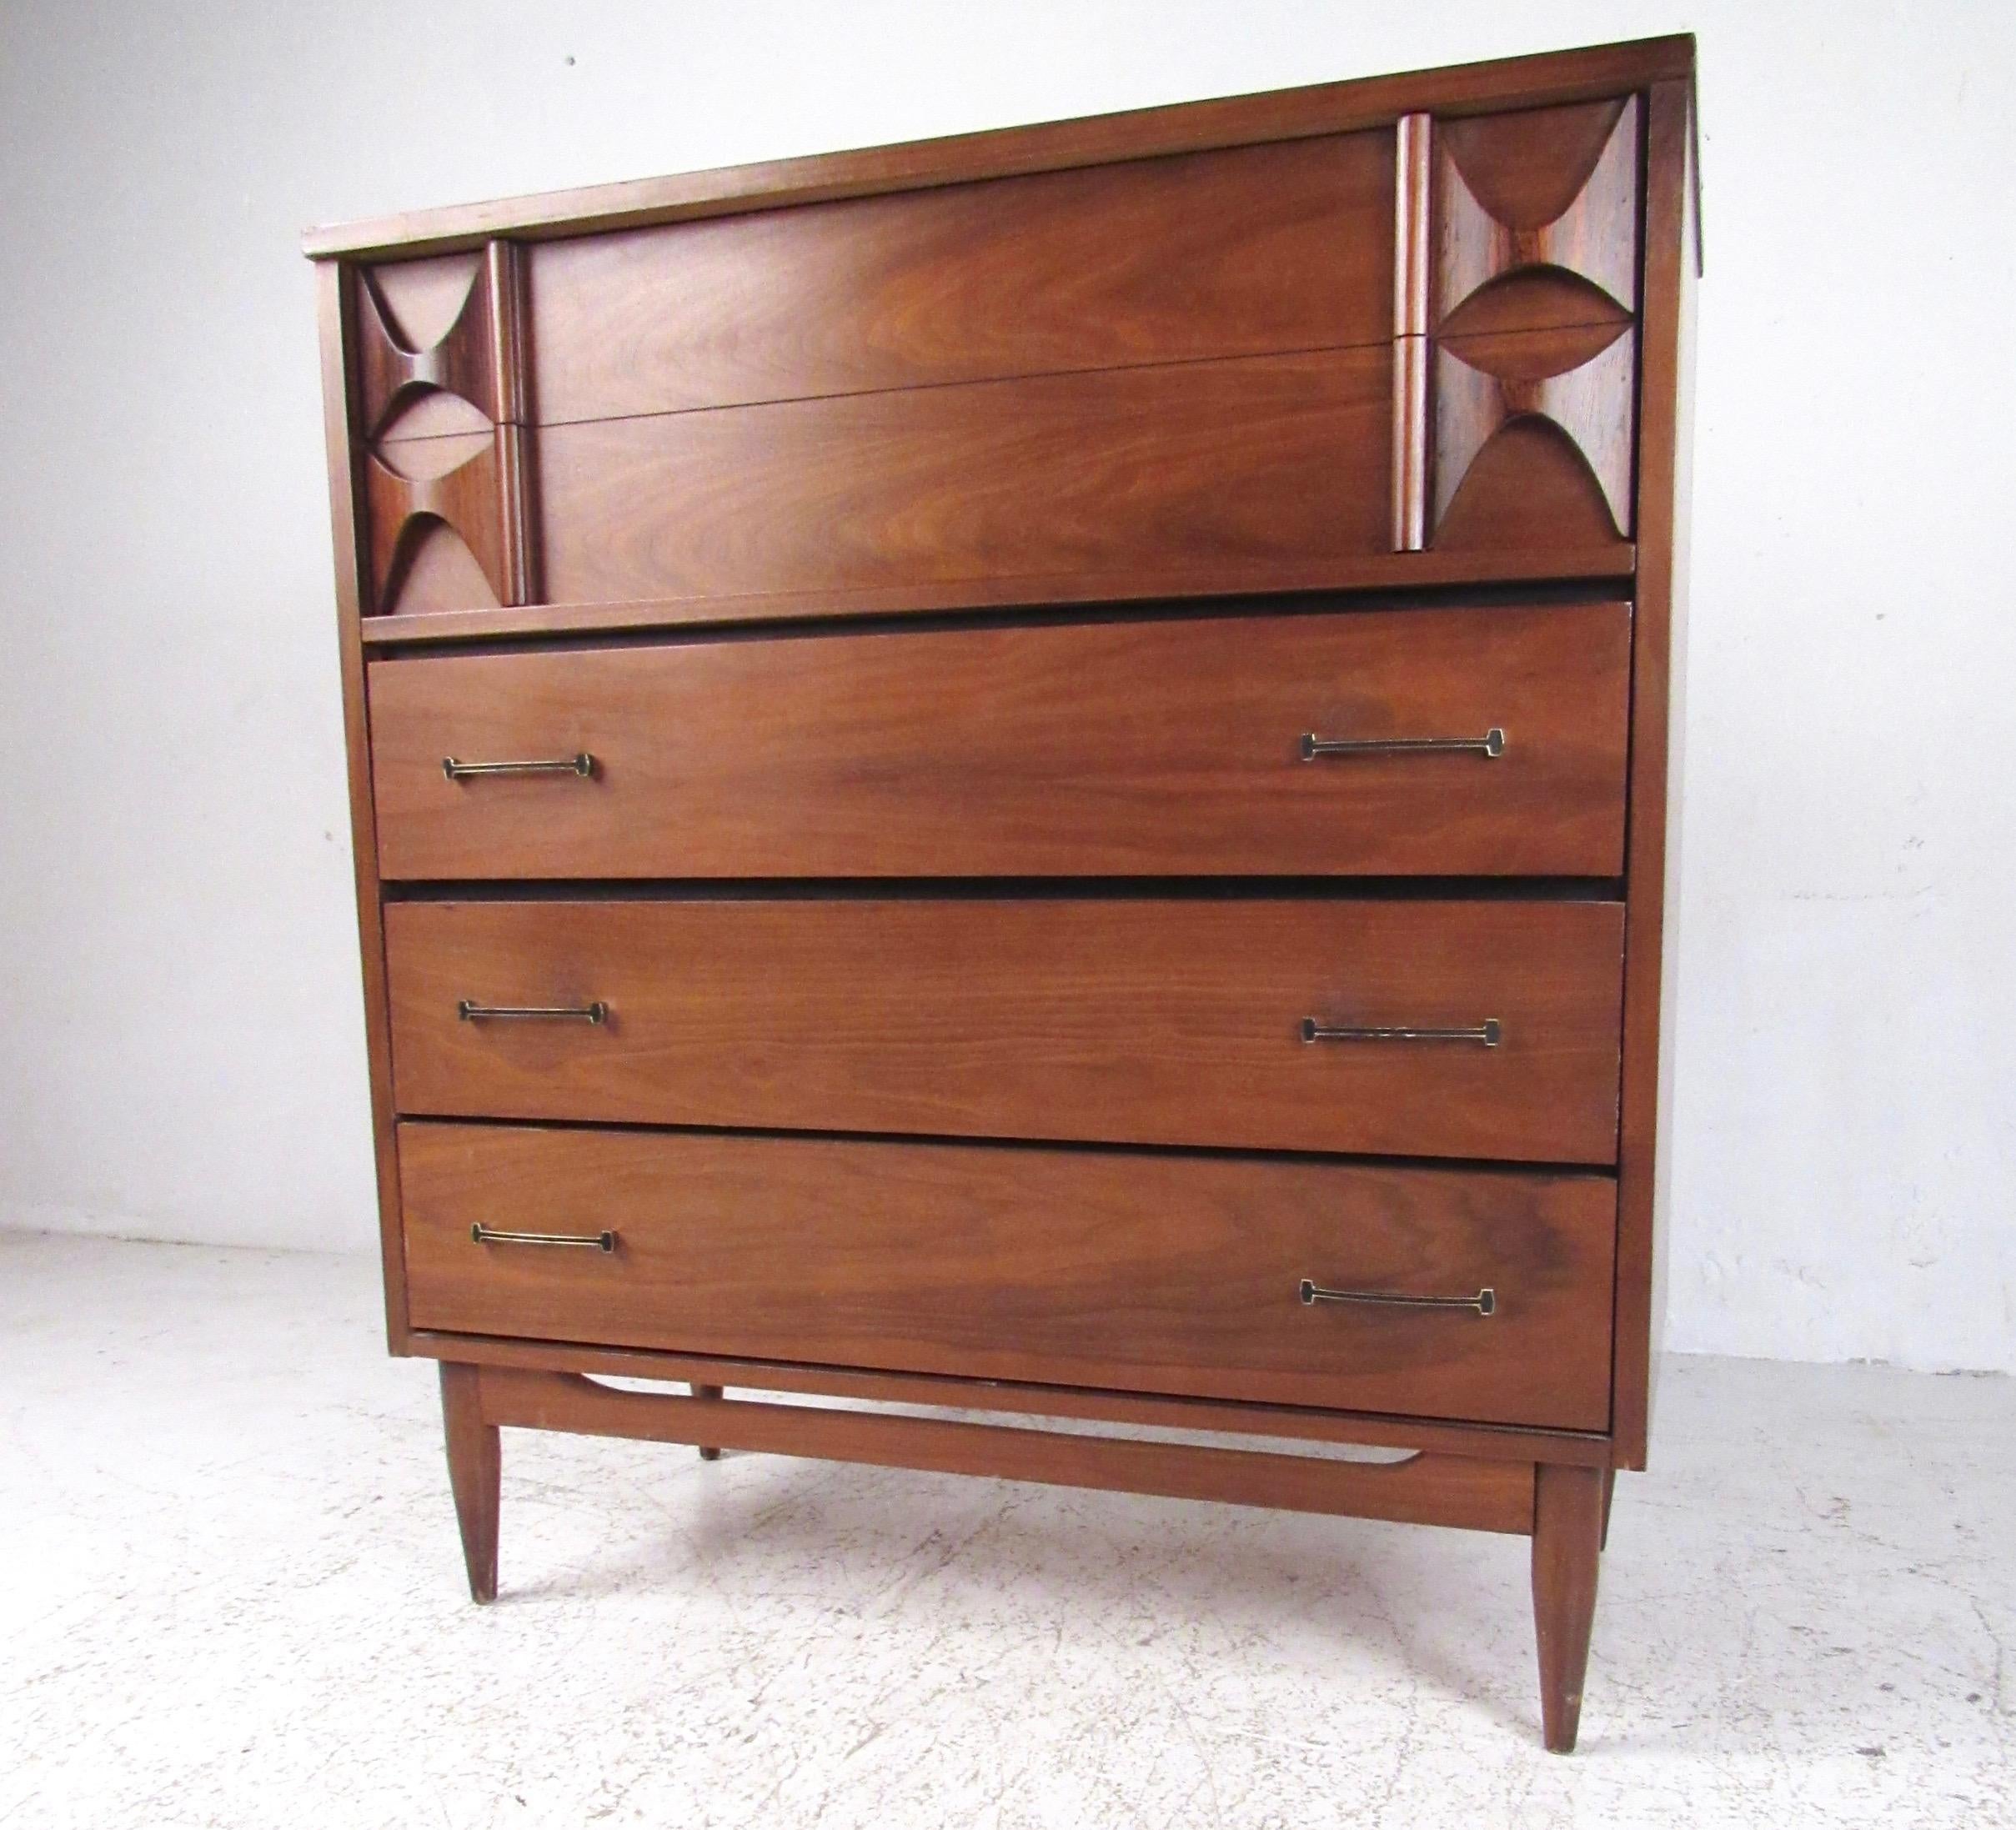 This unique midcentury dresser features striking natural wood finish, Brasilia style sculptural drawer fronts, and unique raised edge top. Compact bedroom storage come with five spacious drawers perfect for organizing clothes and other necessities.